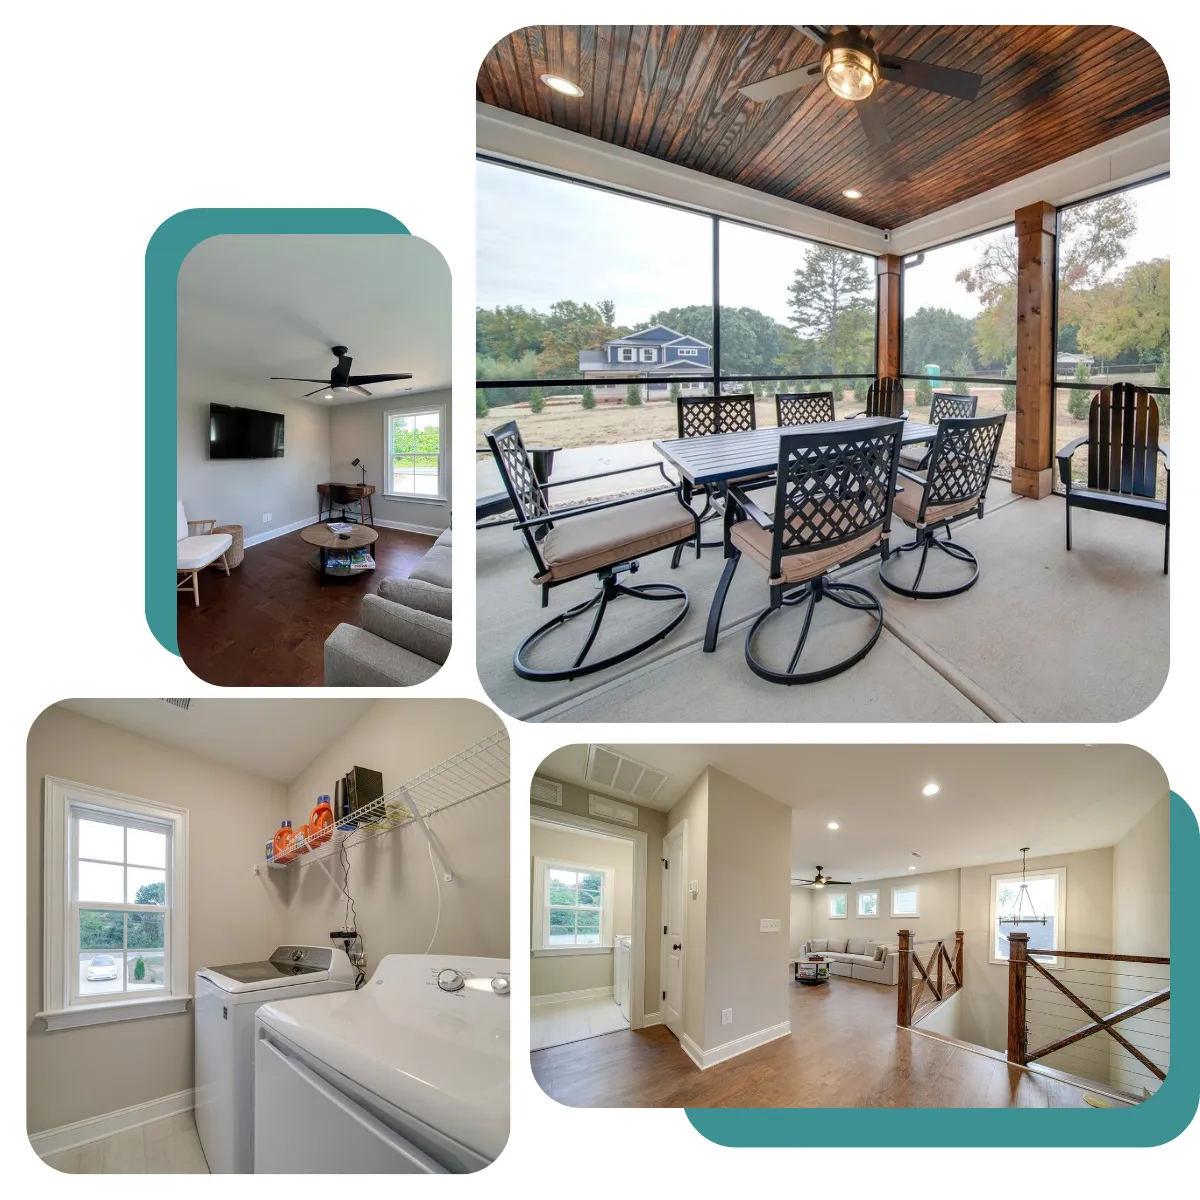 Belmont Getaway offers 4 large bedrooms, a modern kitchen, a snug den with a smart TV, a loft lounge, and an outdoor dining area with a BBQ grill.